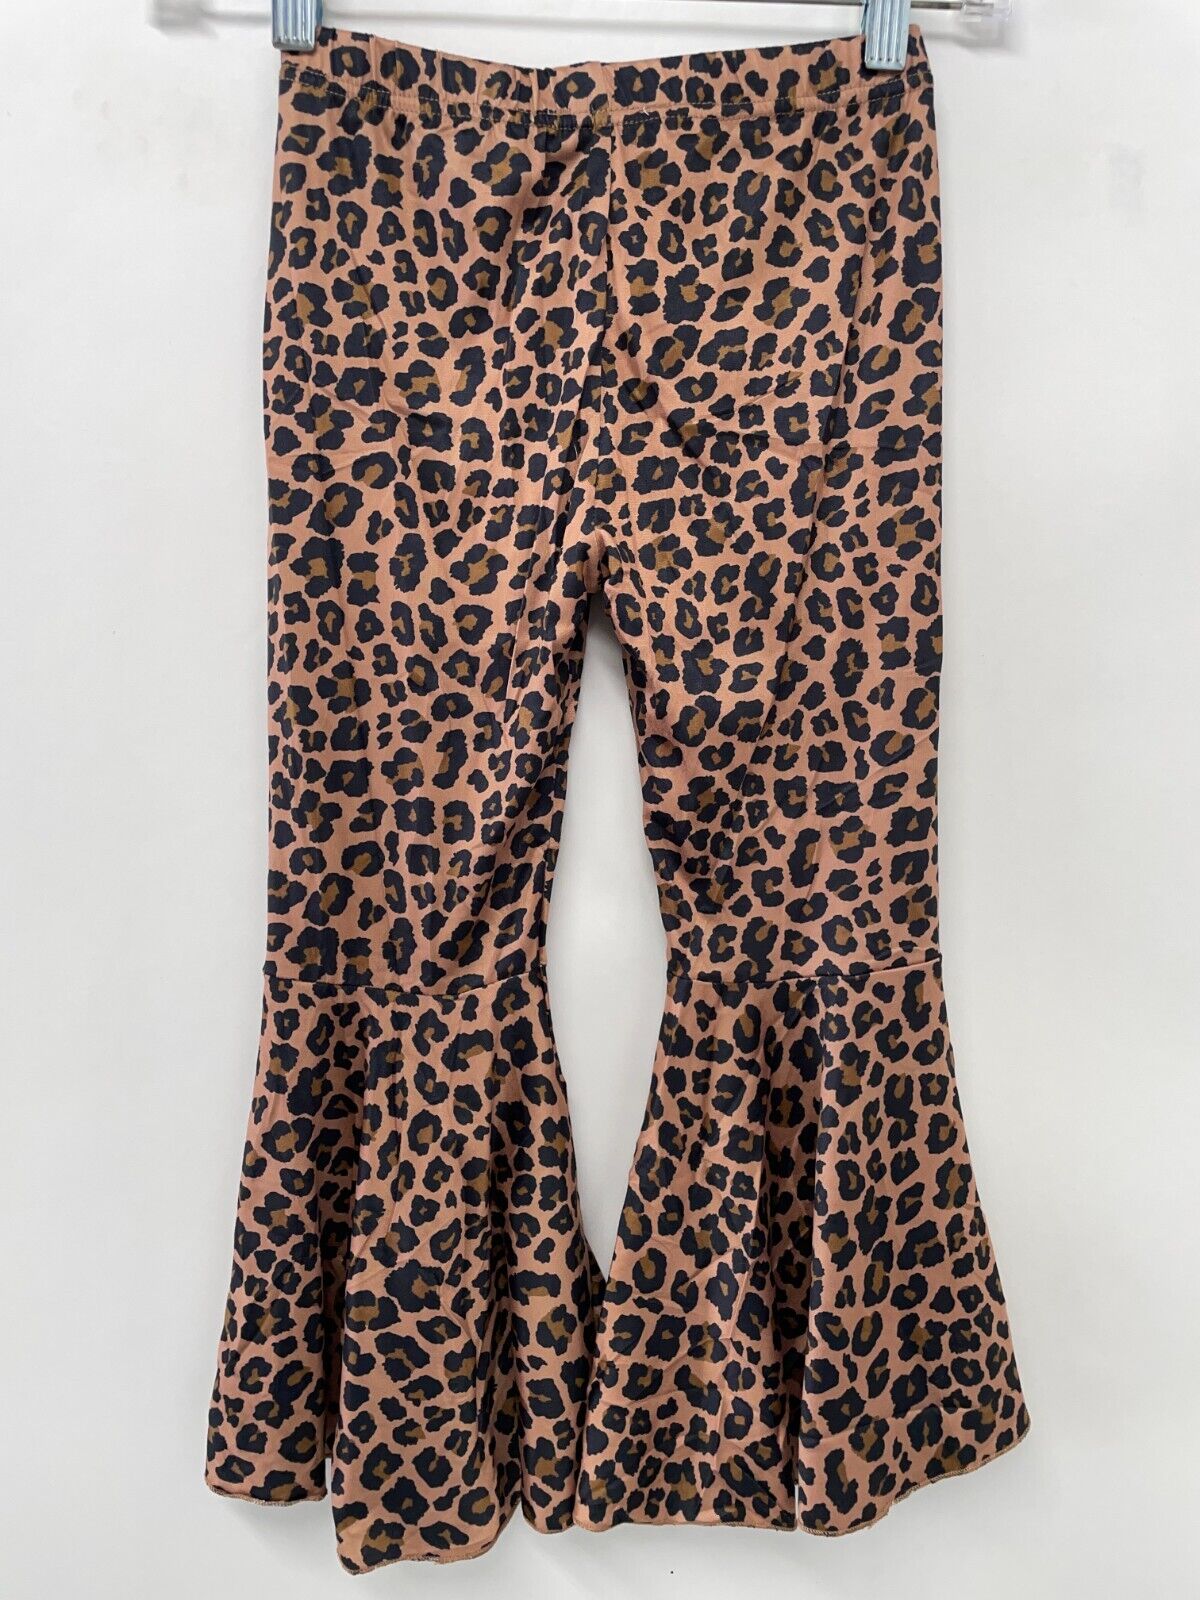 Bailey's Blossoms Toddler 5T Lina Pleated Bell Bottoms Leopard Flare Pants NWT